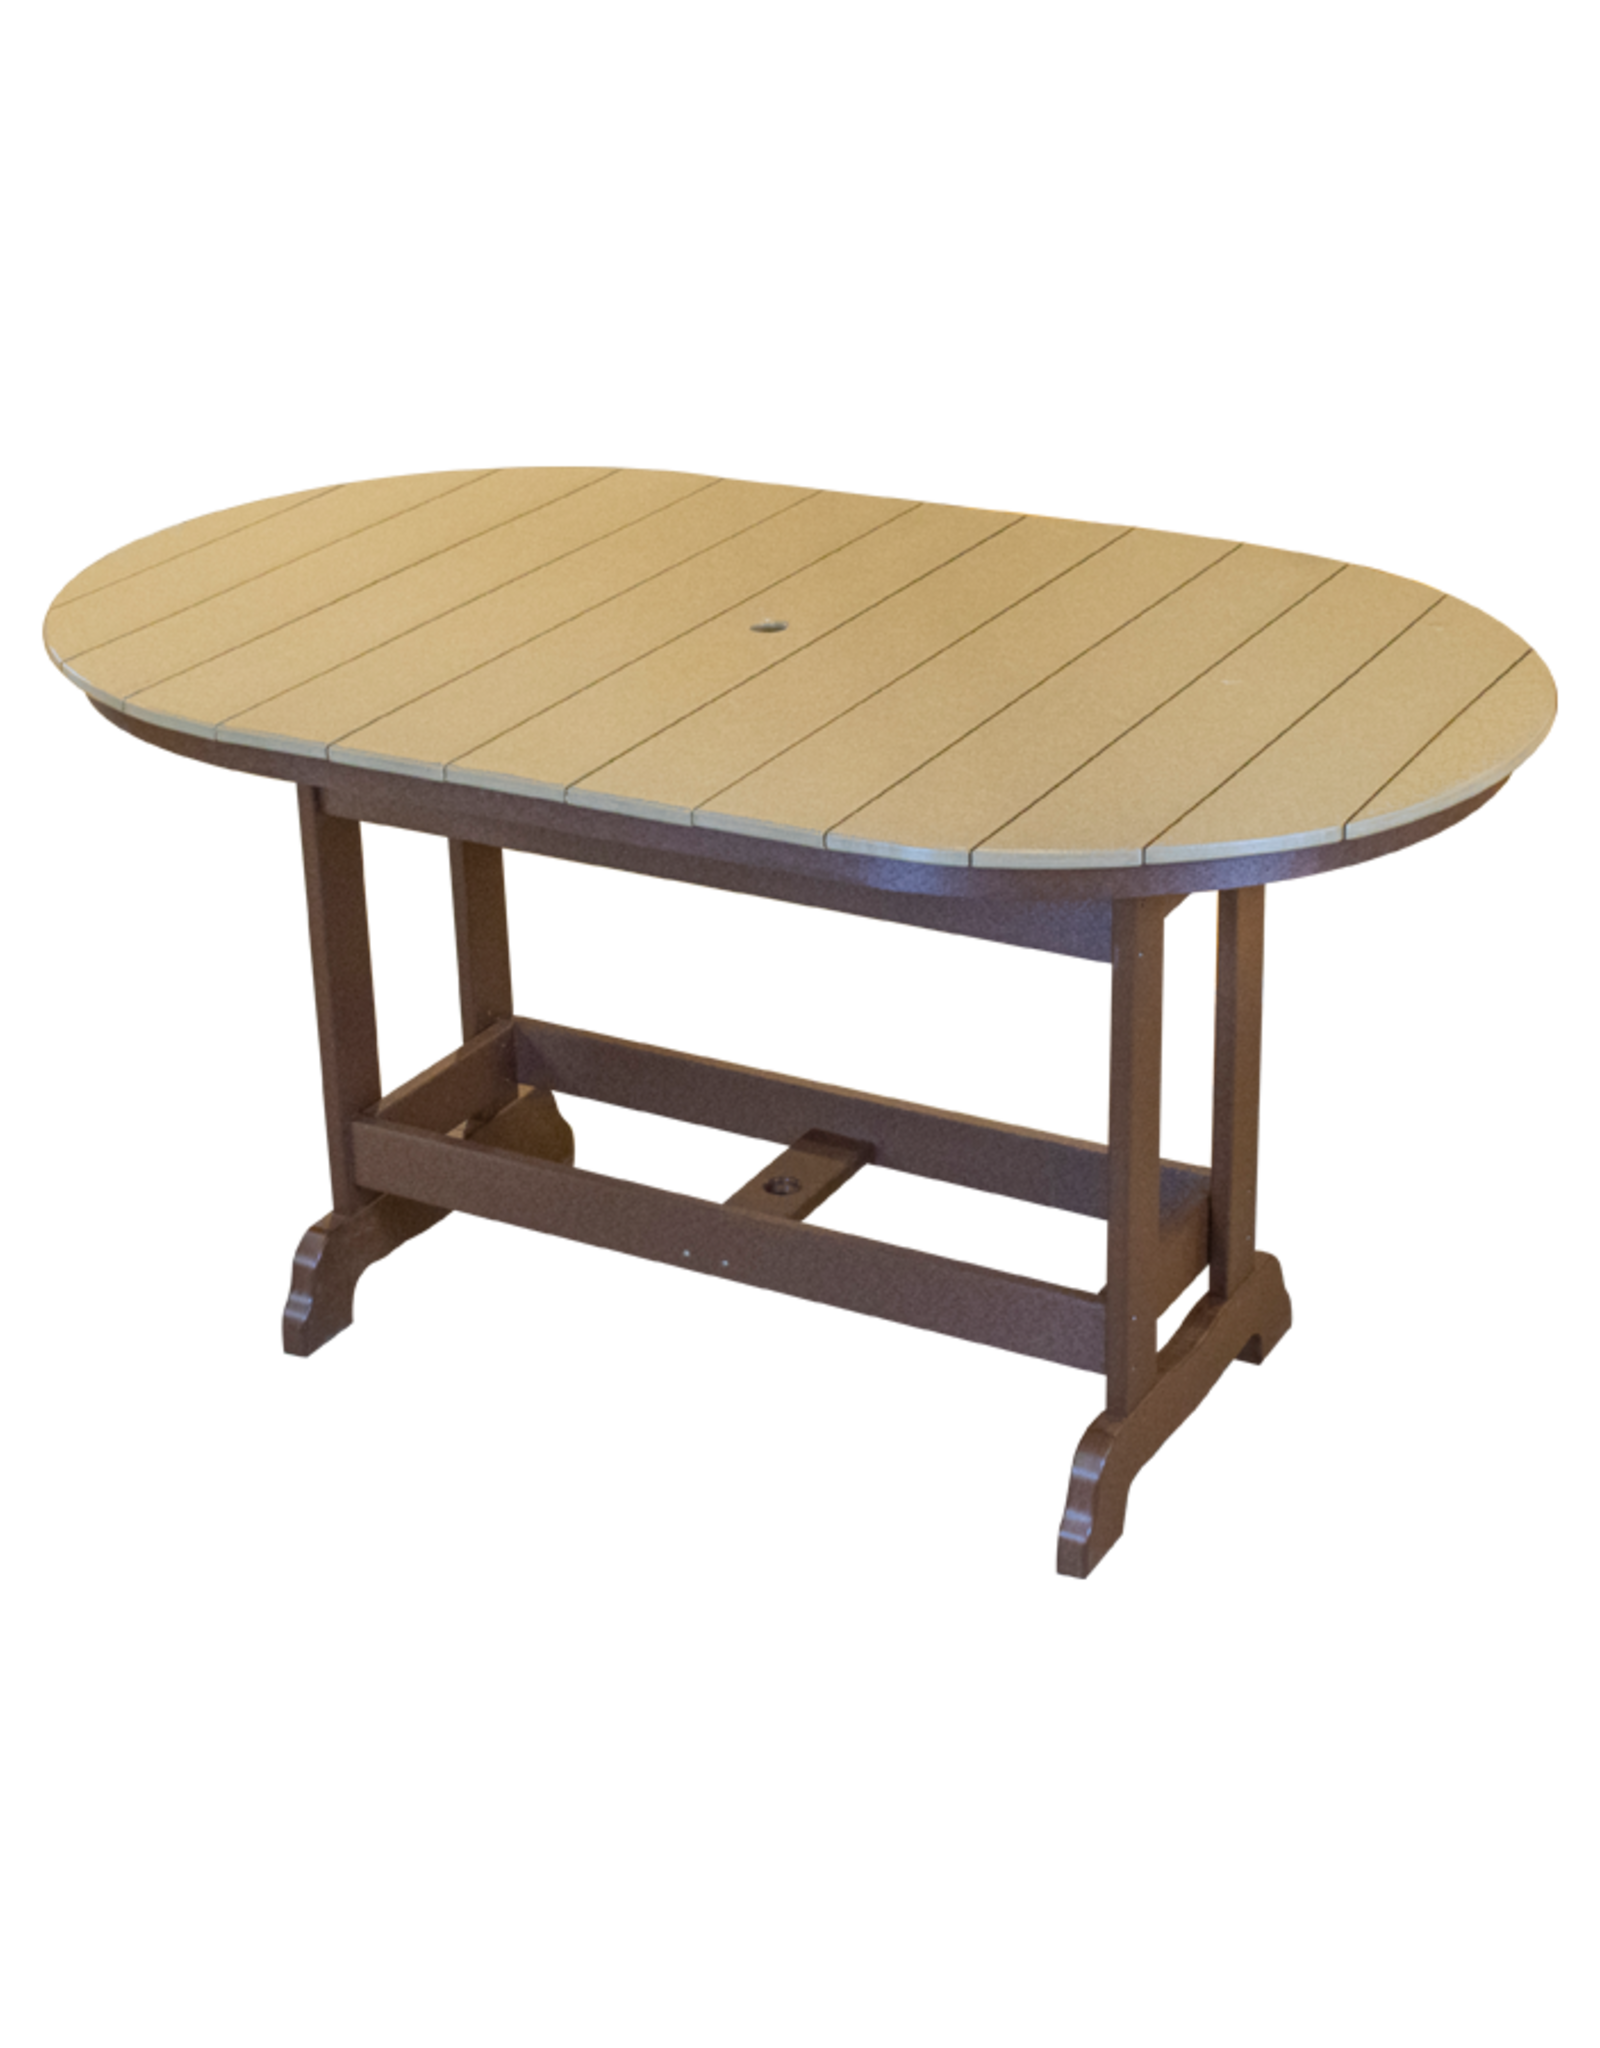 Kanyon Living ORDER - K222 - Kanyon Living Dining Height 6' Oval Table